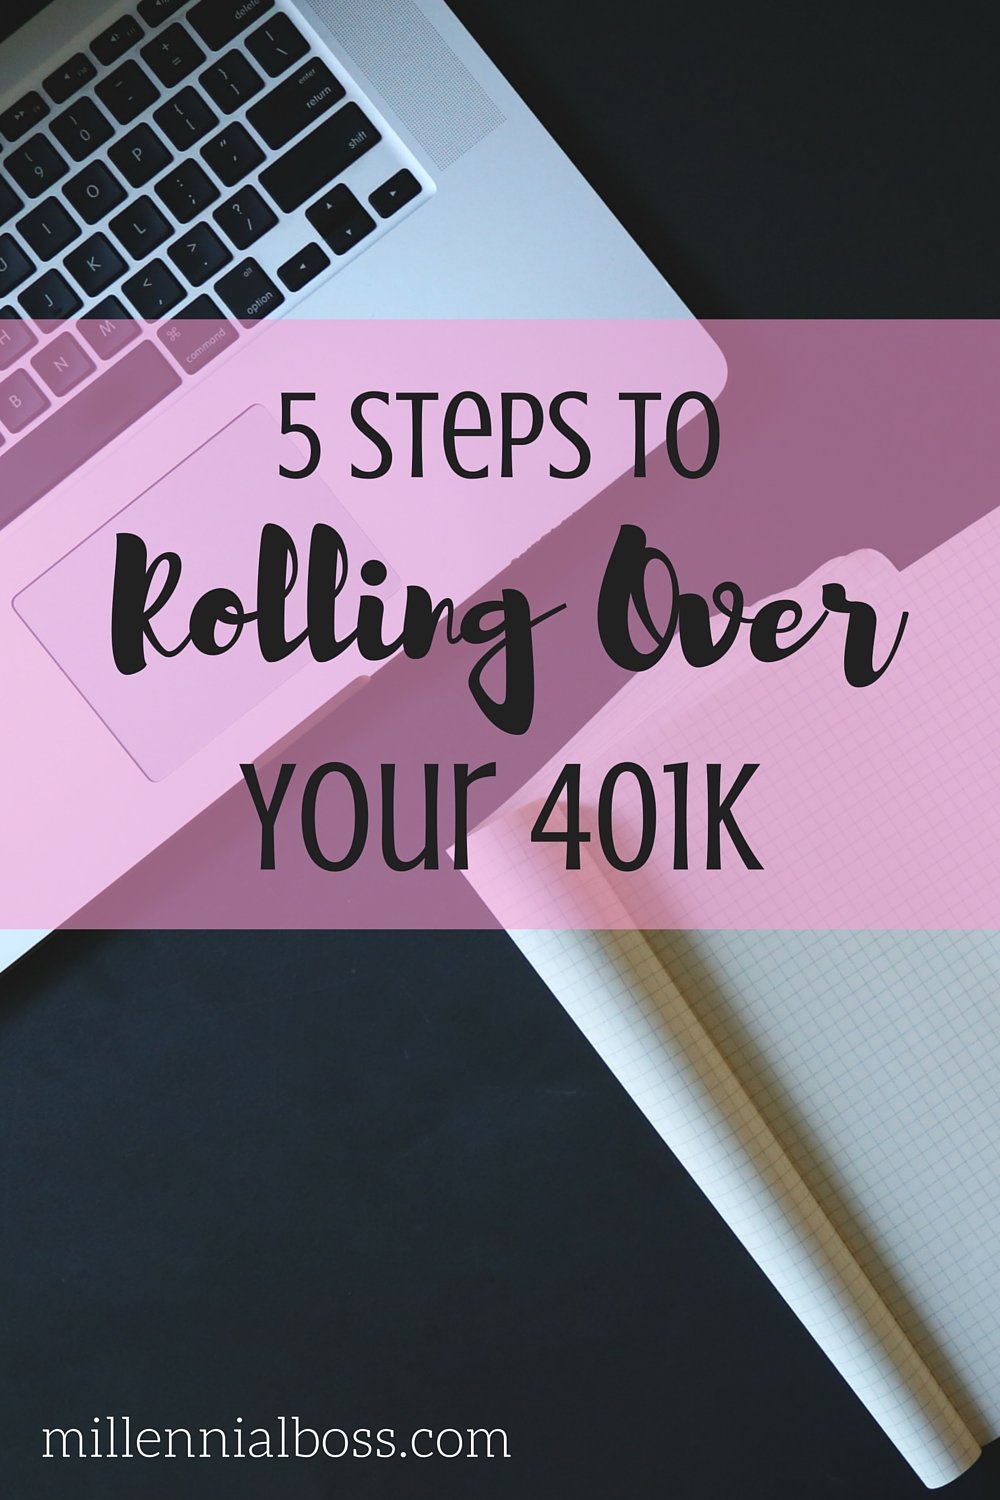 5 Steps to Rolling Over Your 401(k)